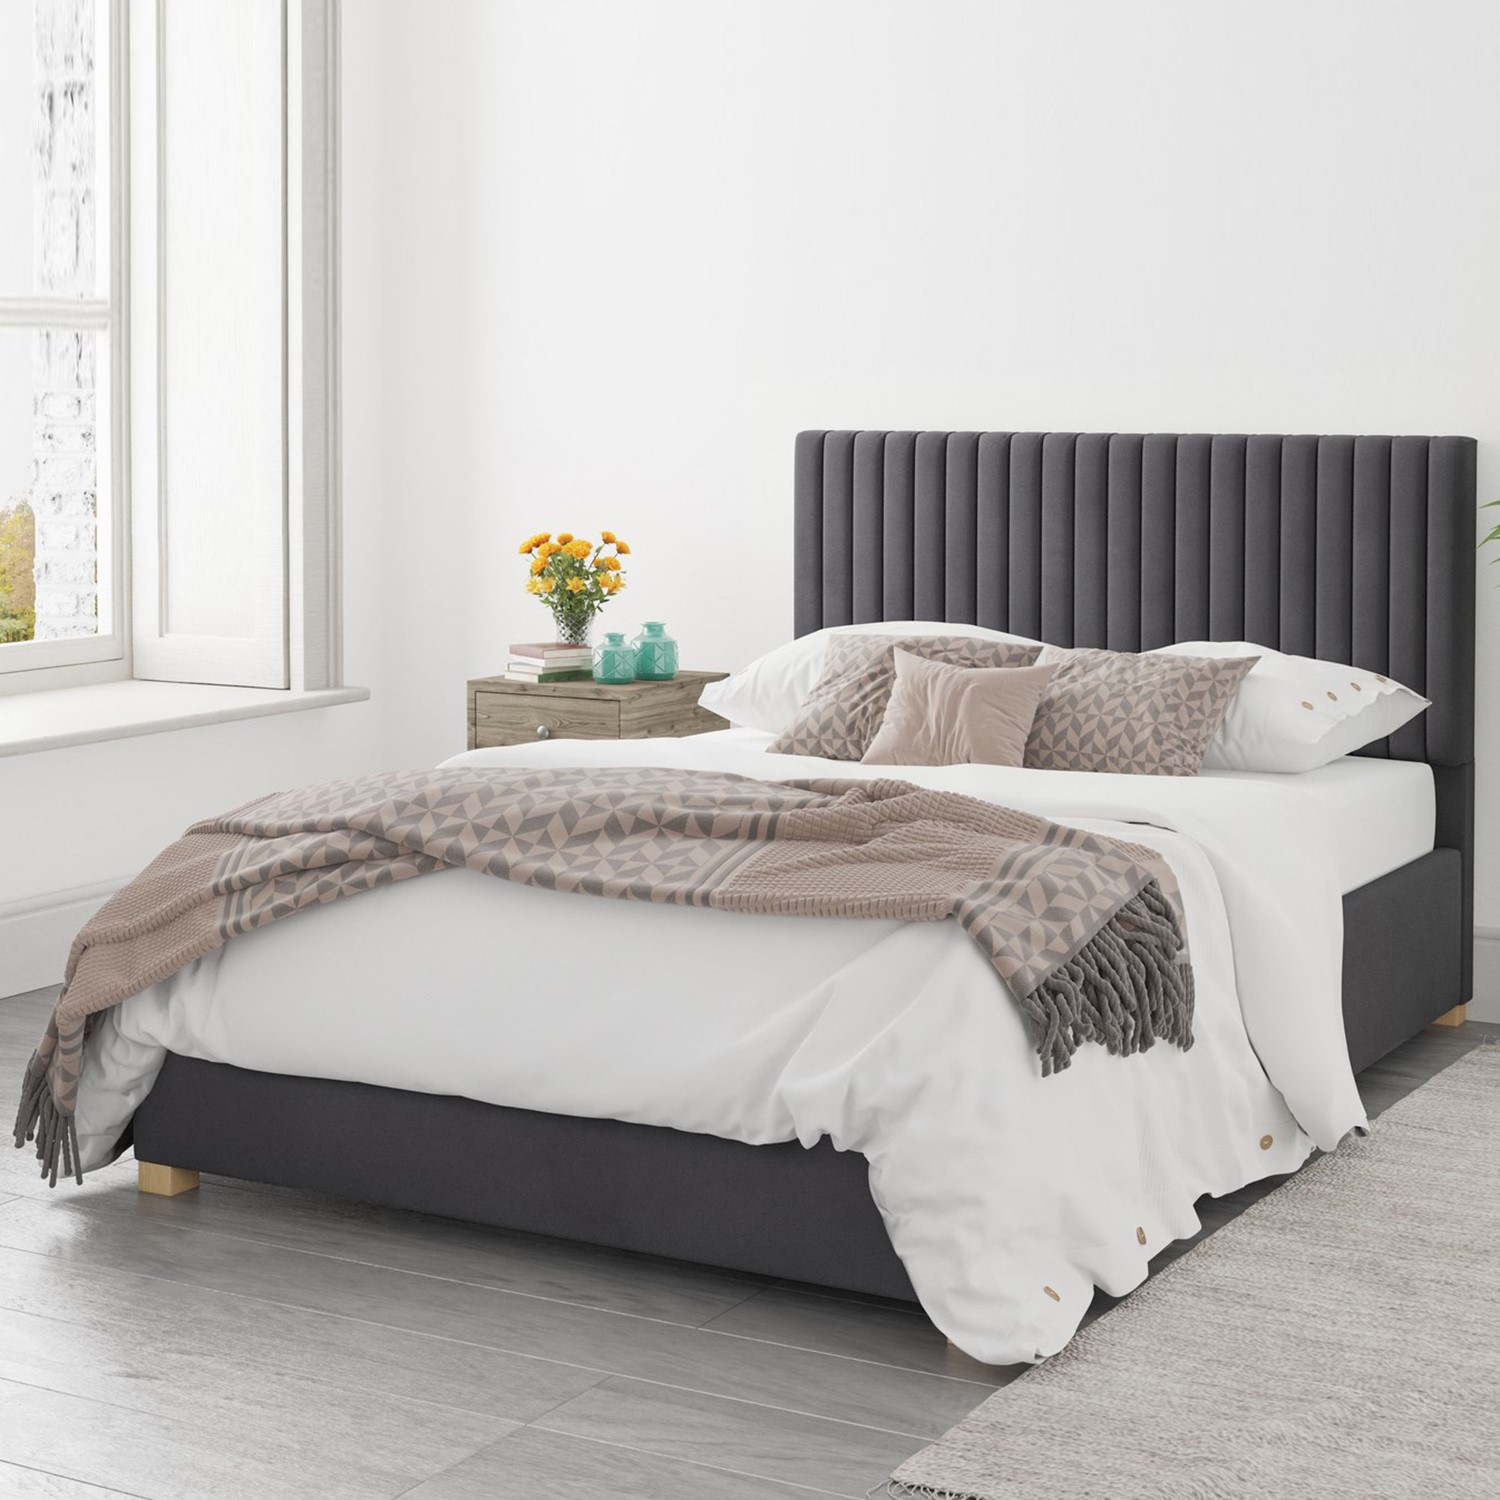 Read more about Grey velvet king size ottoman bed piccadilly aspire